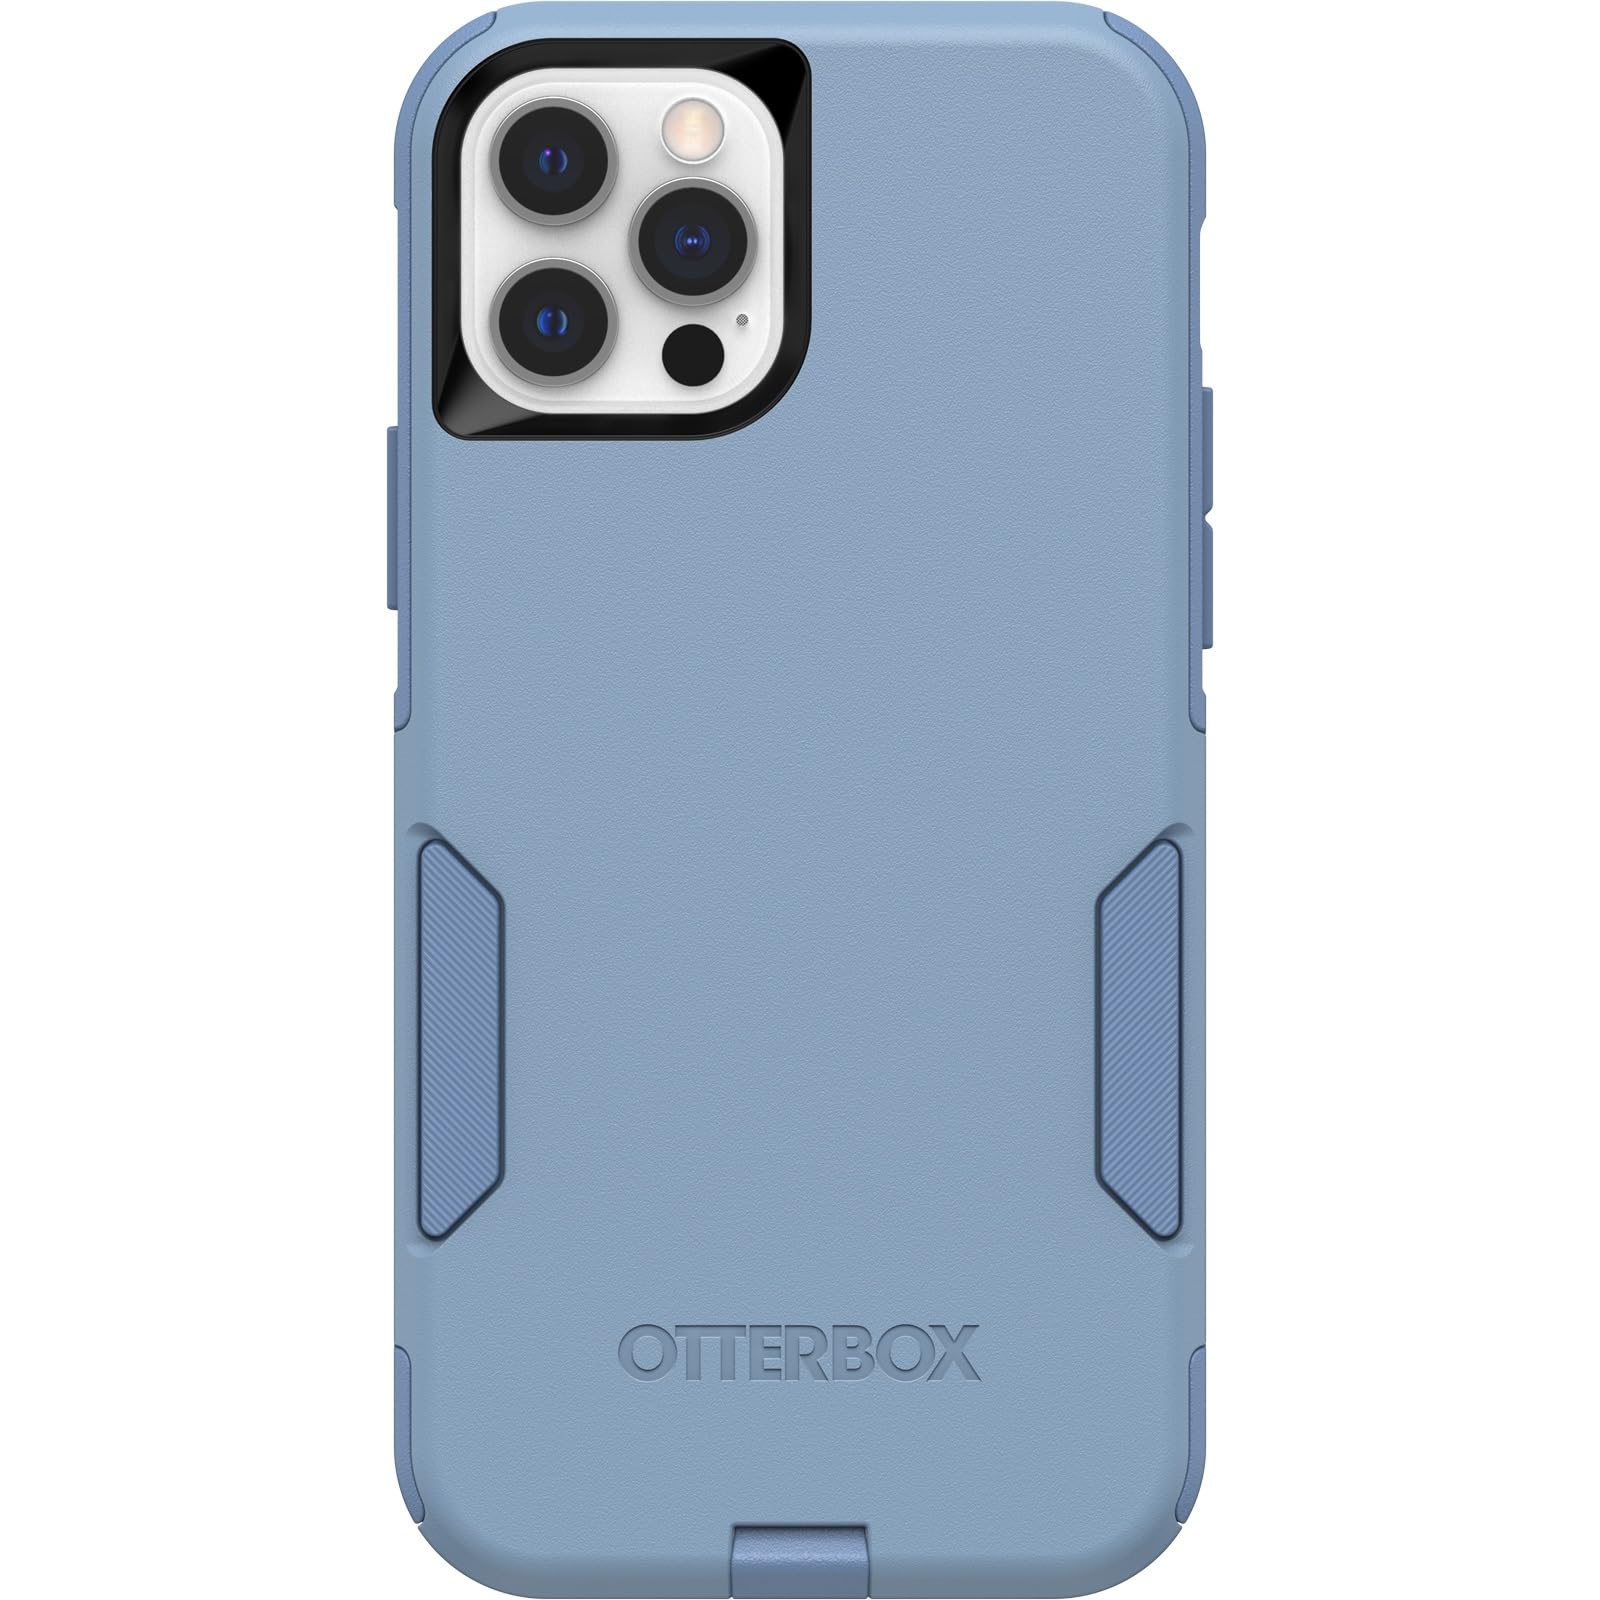 OtterBox iPhone 12 & iPhone 12 Pro (Only) - Commuter Series Case - Crisp Denim (Blue) - with Cleaning Cloth - Slim & Tough - Pocket-Friendly - with Port Protection - Non-Retail Packaging